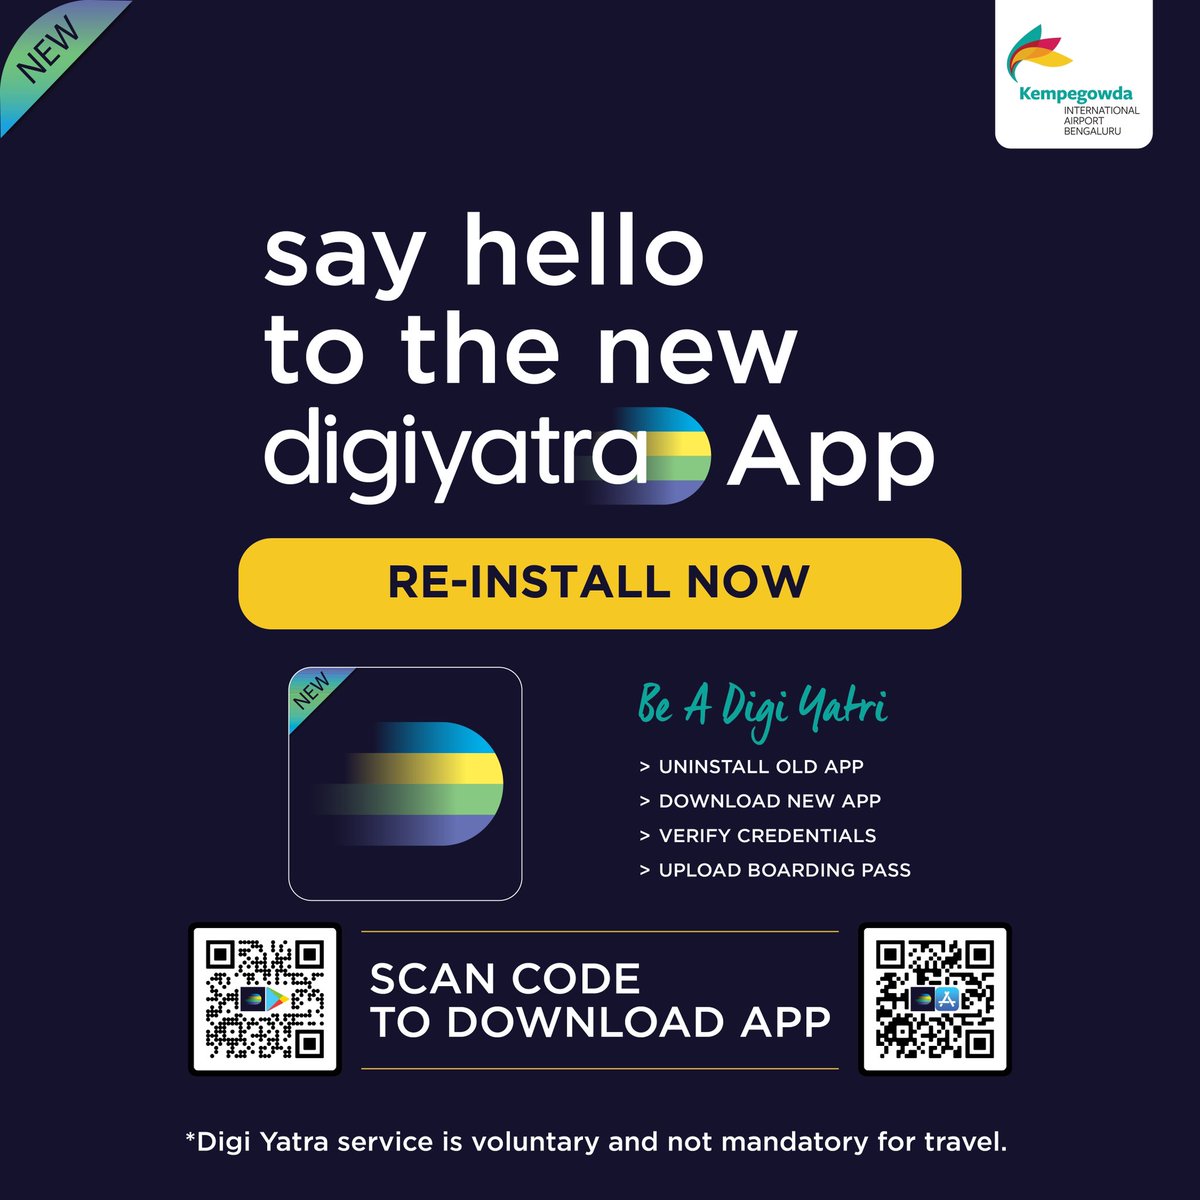 Download the new Digi Yatra App for a seamless and hassle-free airport journey. Become a Digi Yatri  and make a time saving travel choice.

#BLRAirport #DigiYatra #FamilyTravel #seamlessjourneys #hasslefreetravel #airportexperience #easytravel #delightfultravel #facialrecognition